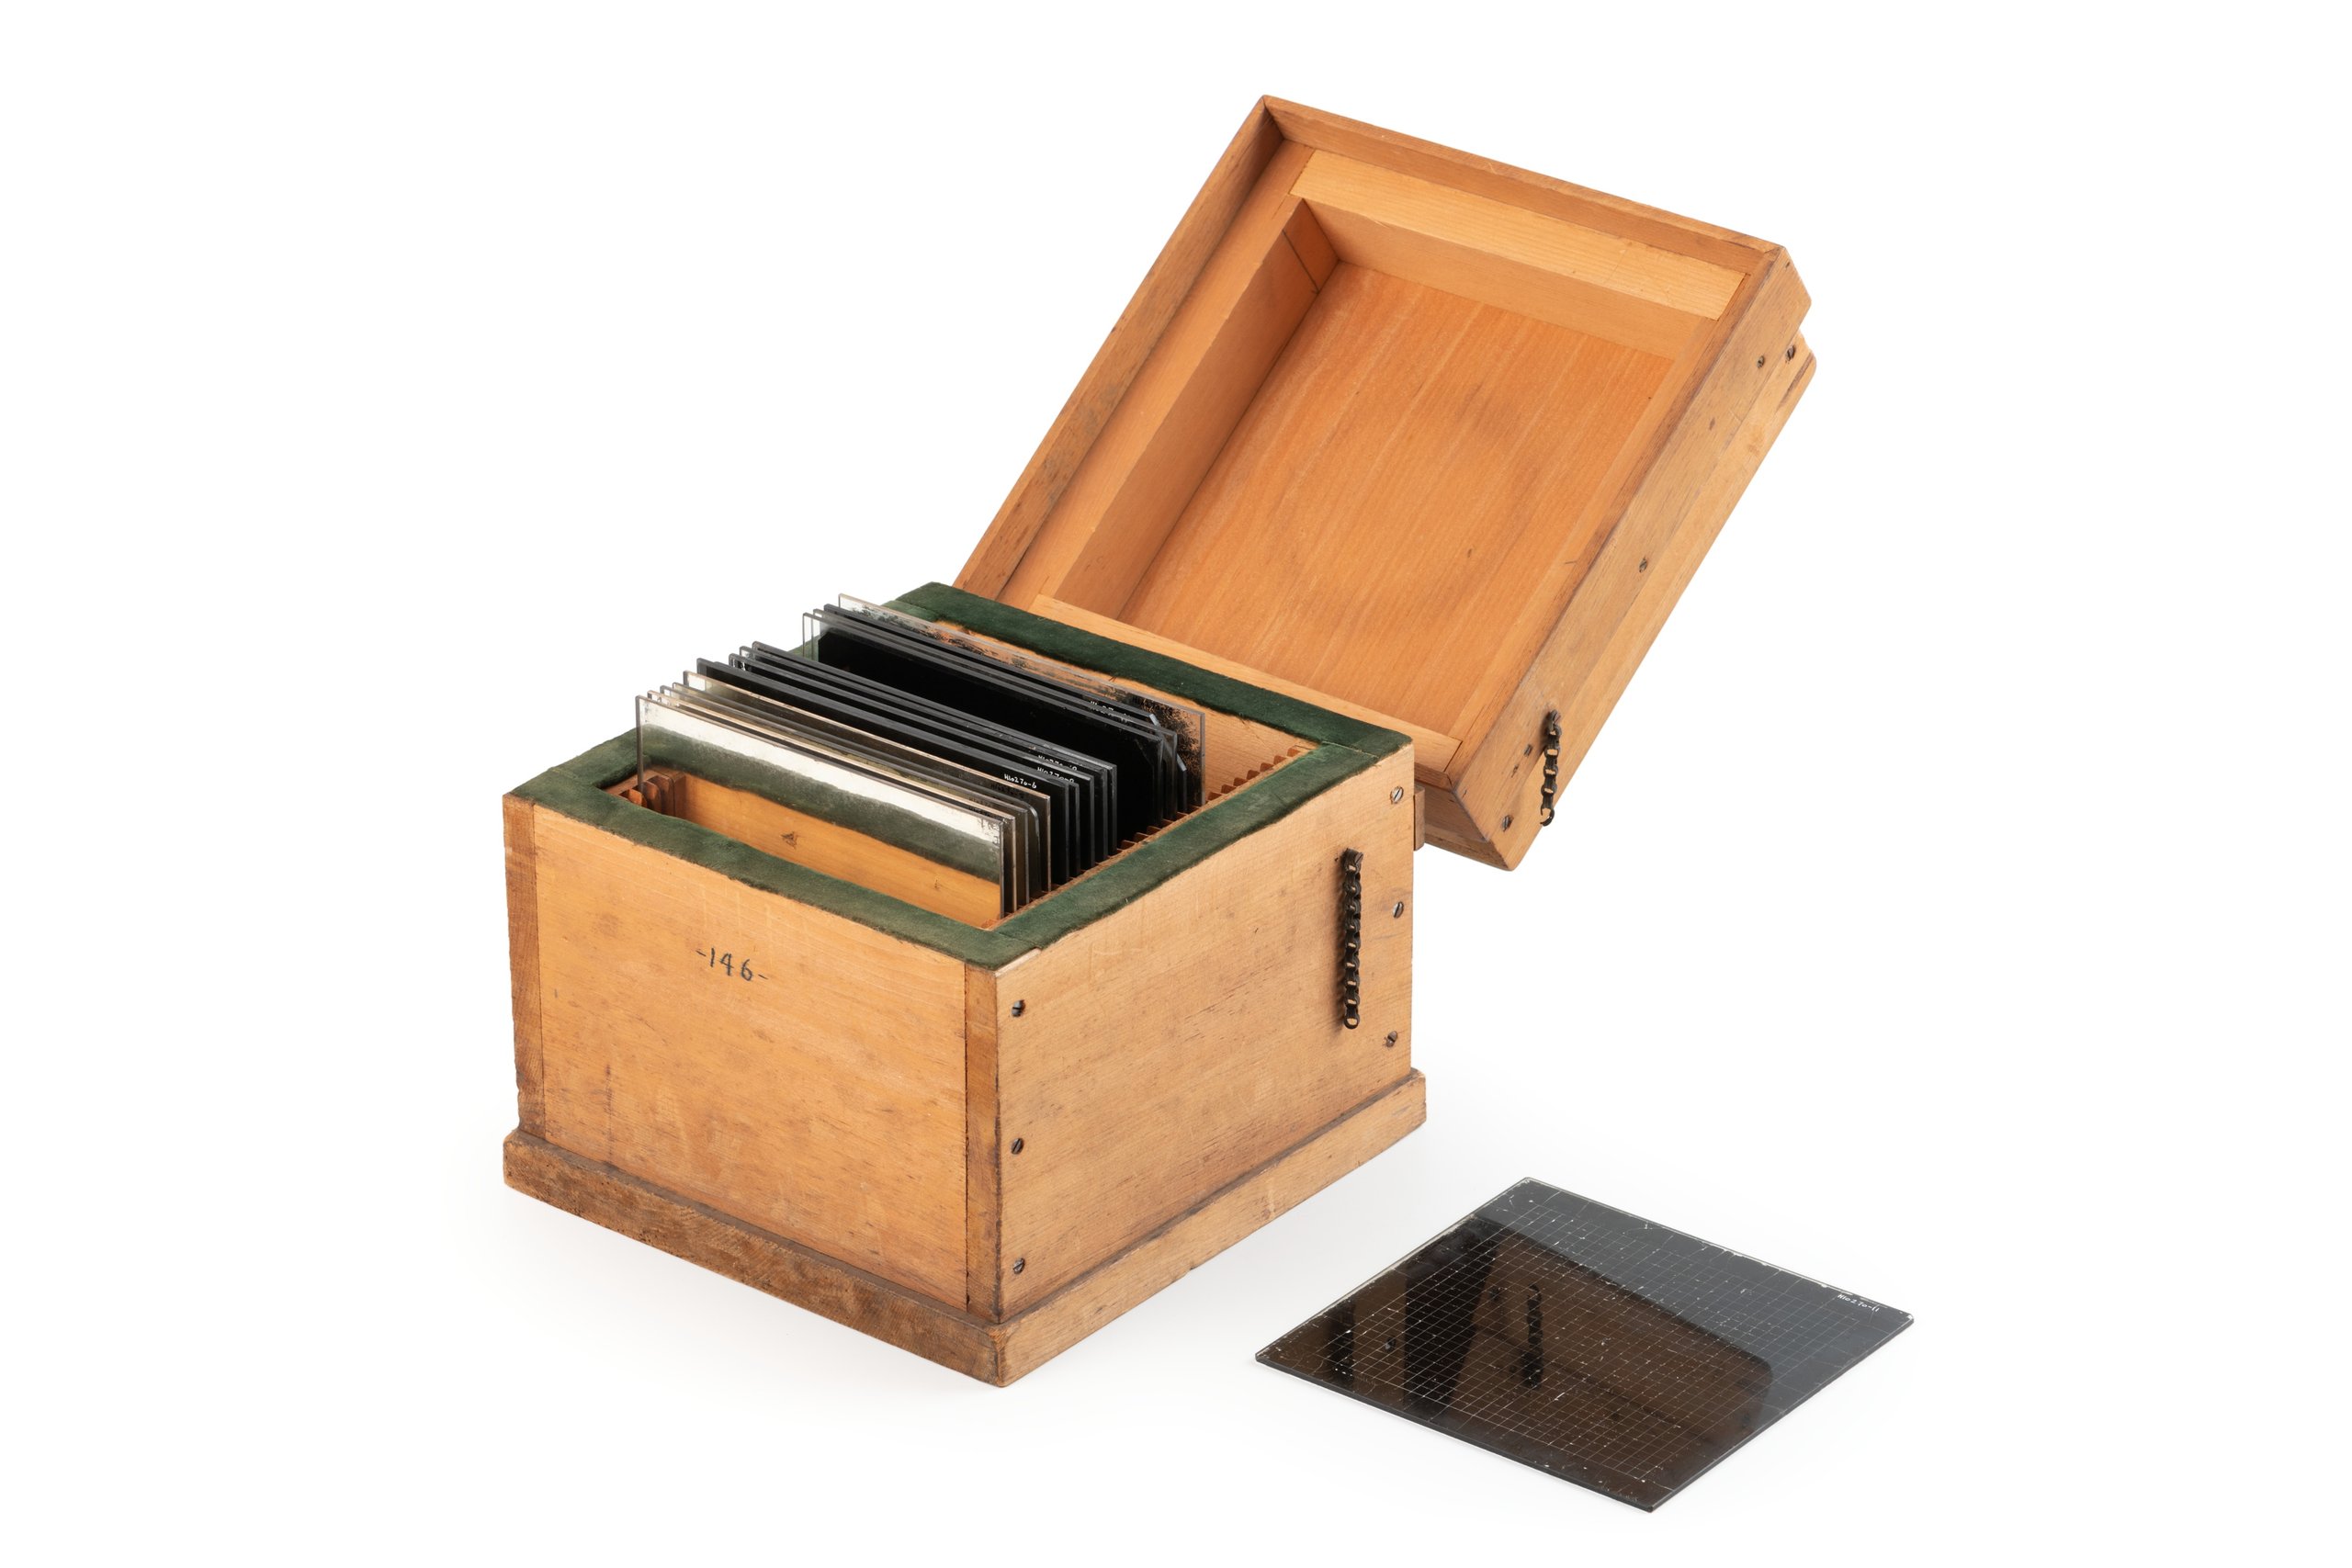 15 Reseaux plates for measuring astronomical photographs in wooden case